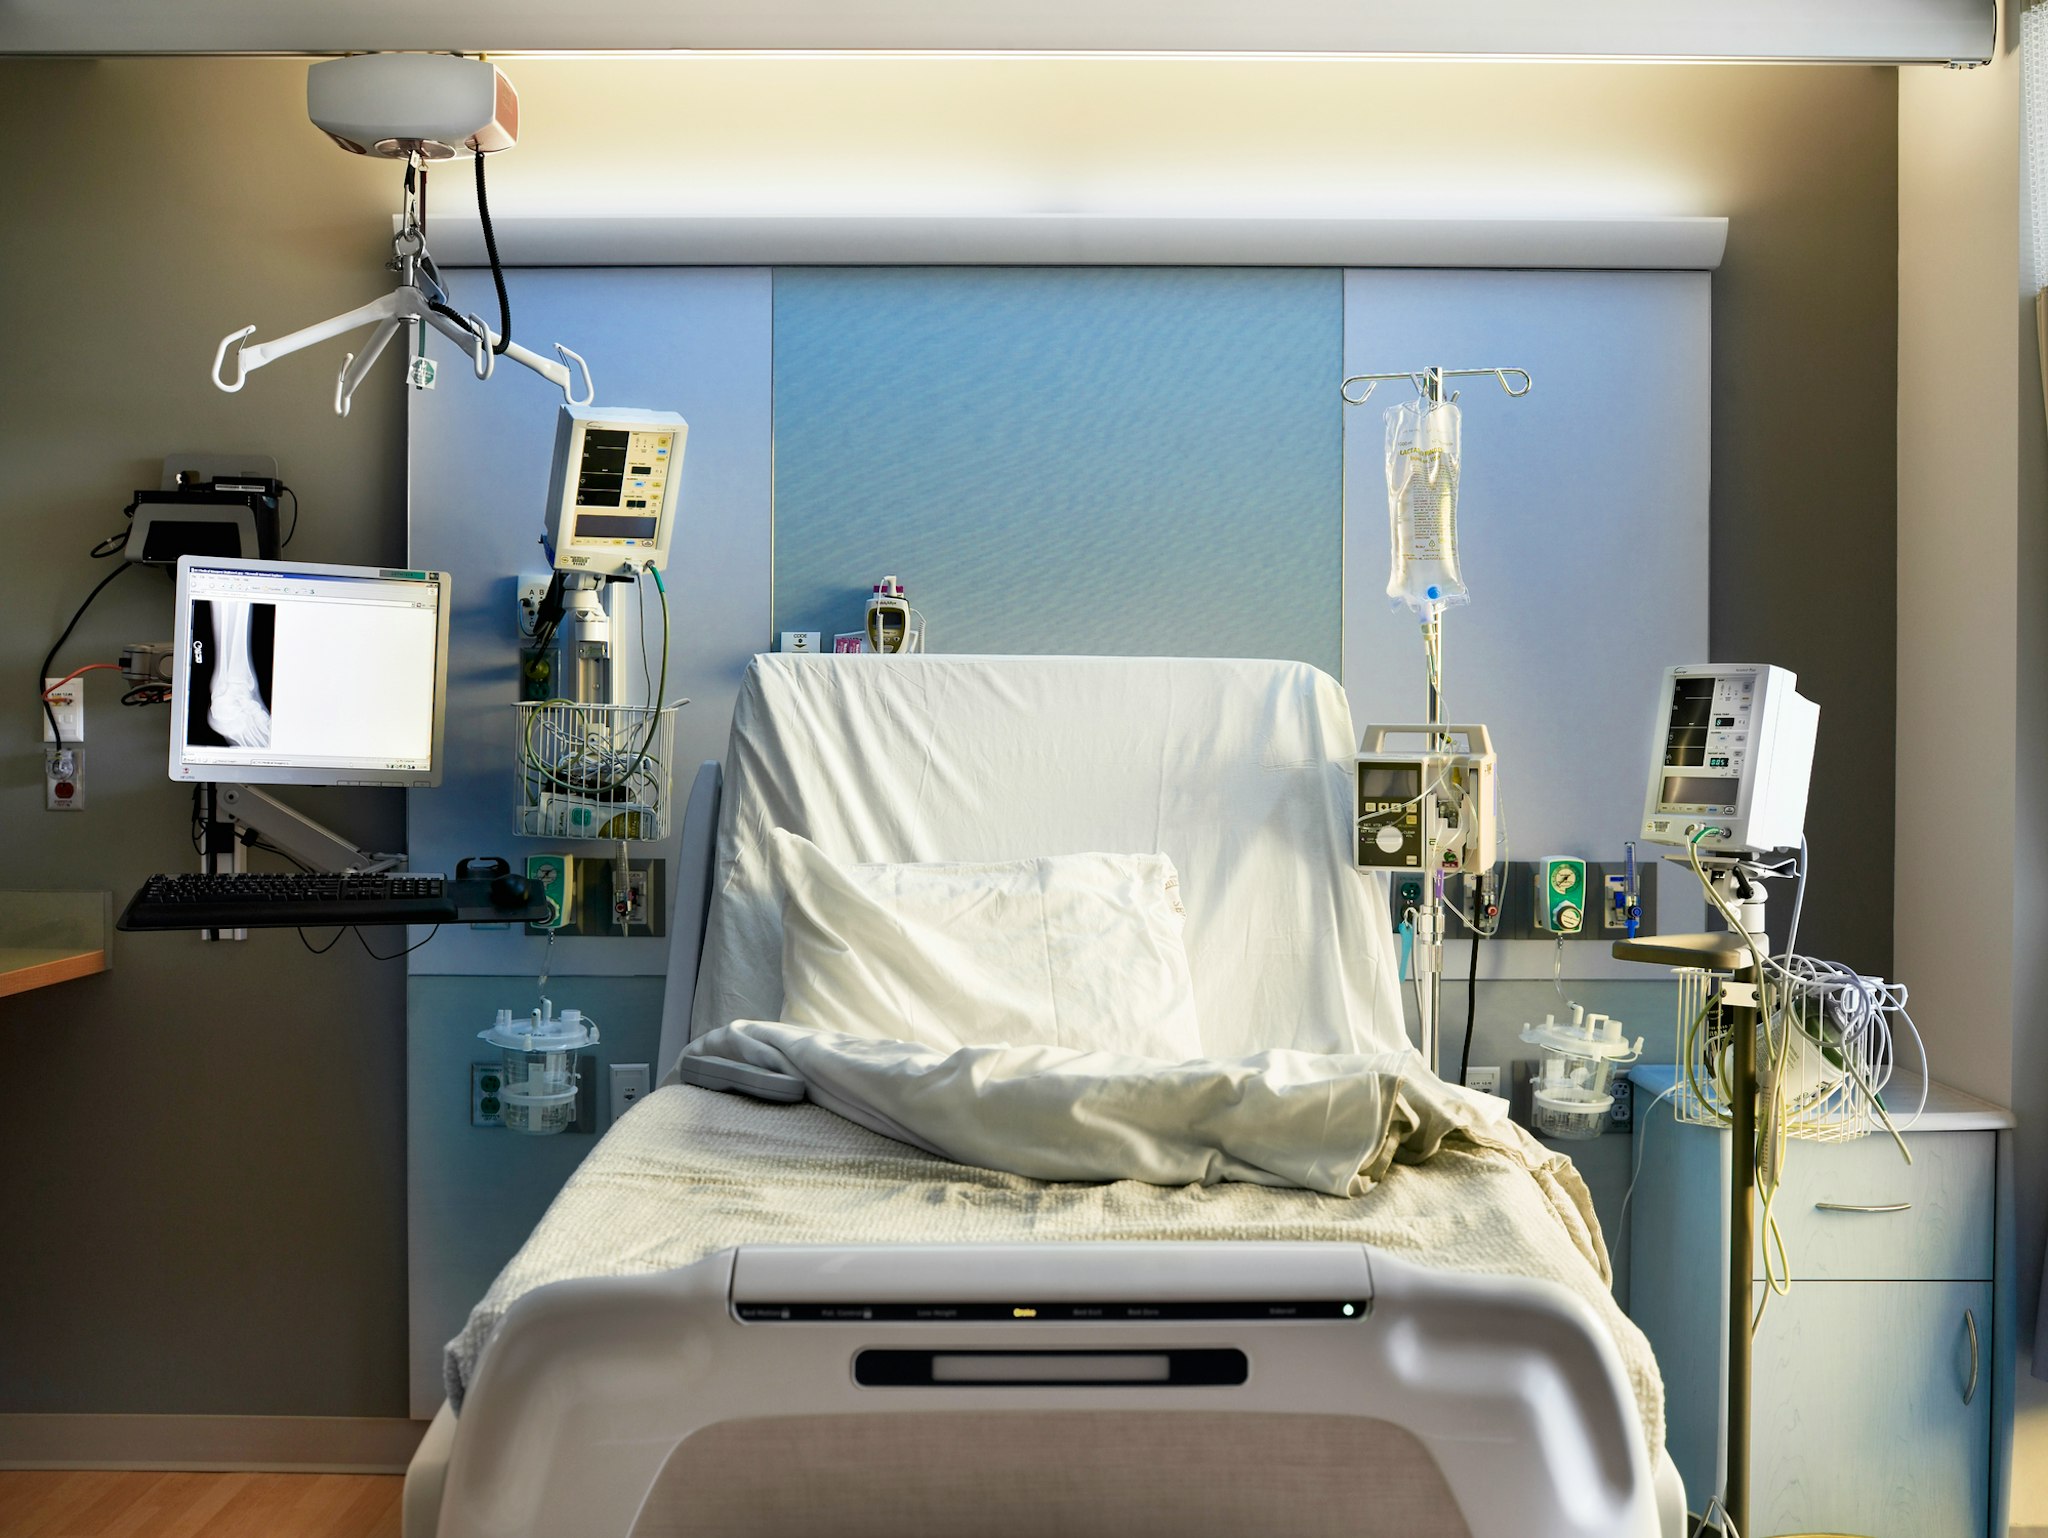 Straight-on view of empty hospital bed with medical equipment.